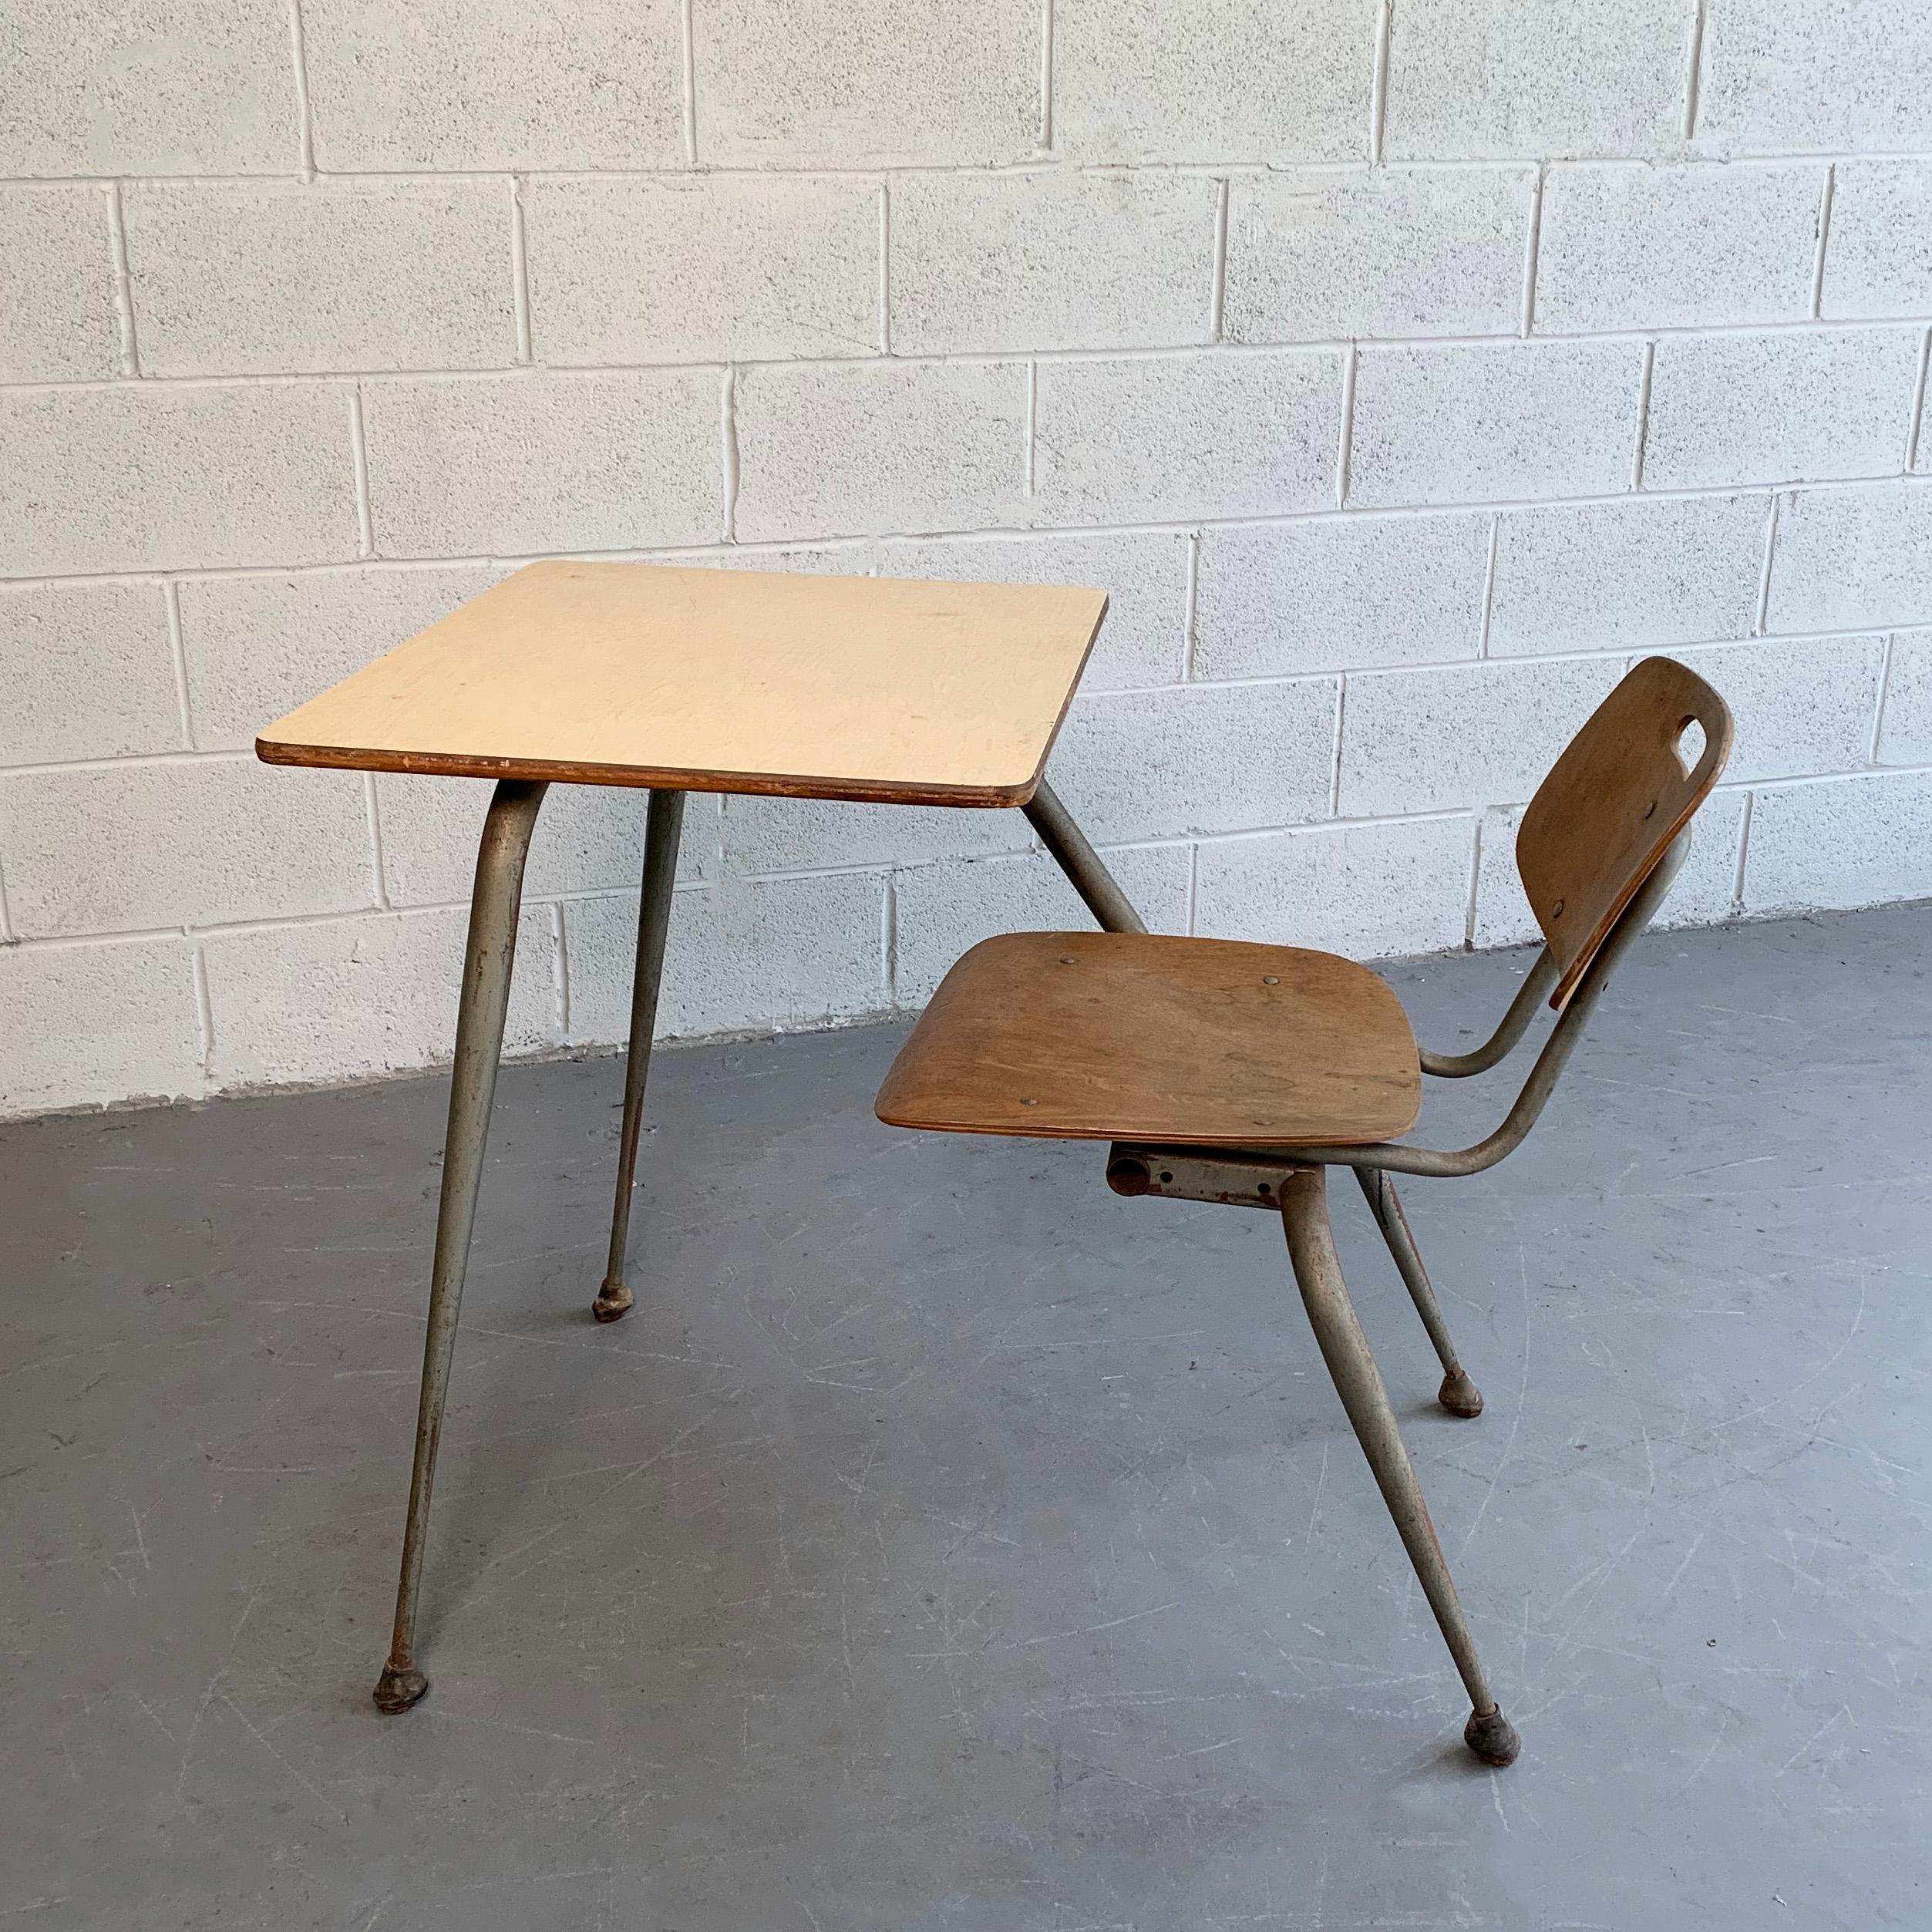 school desk with chair attached